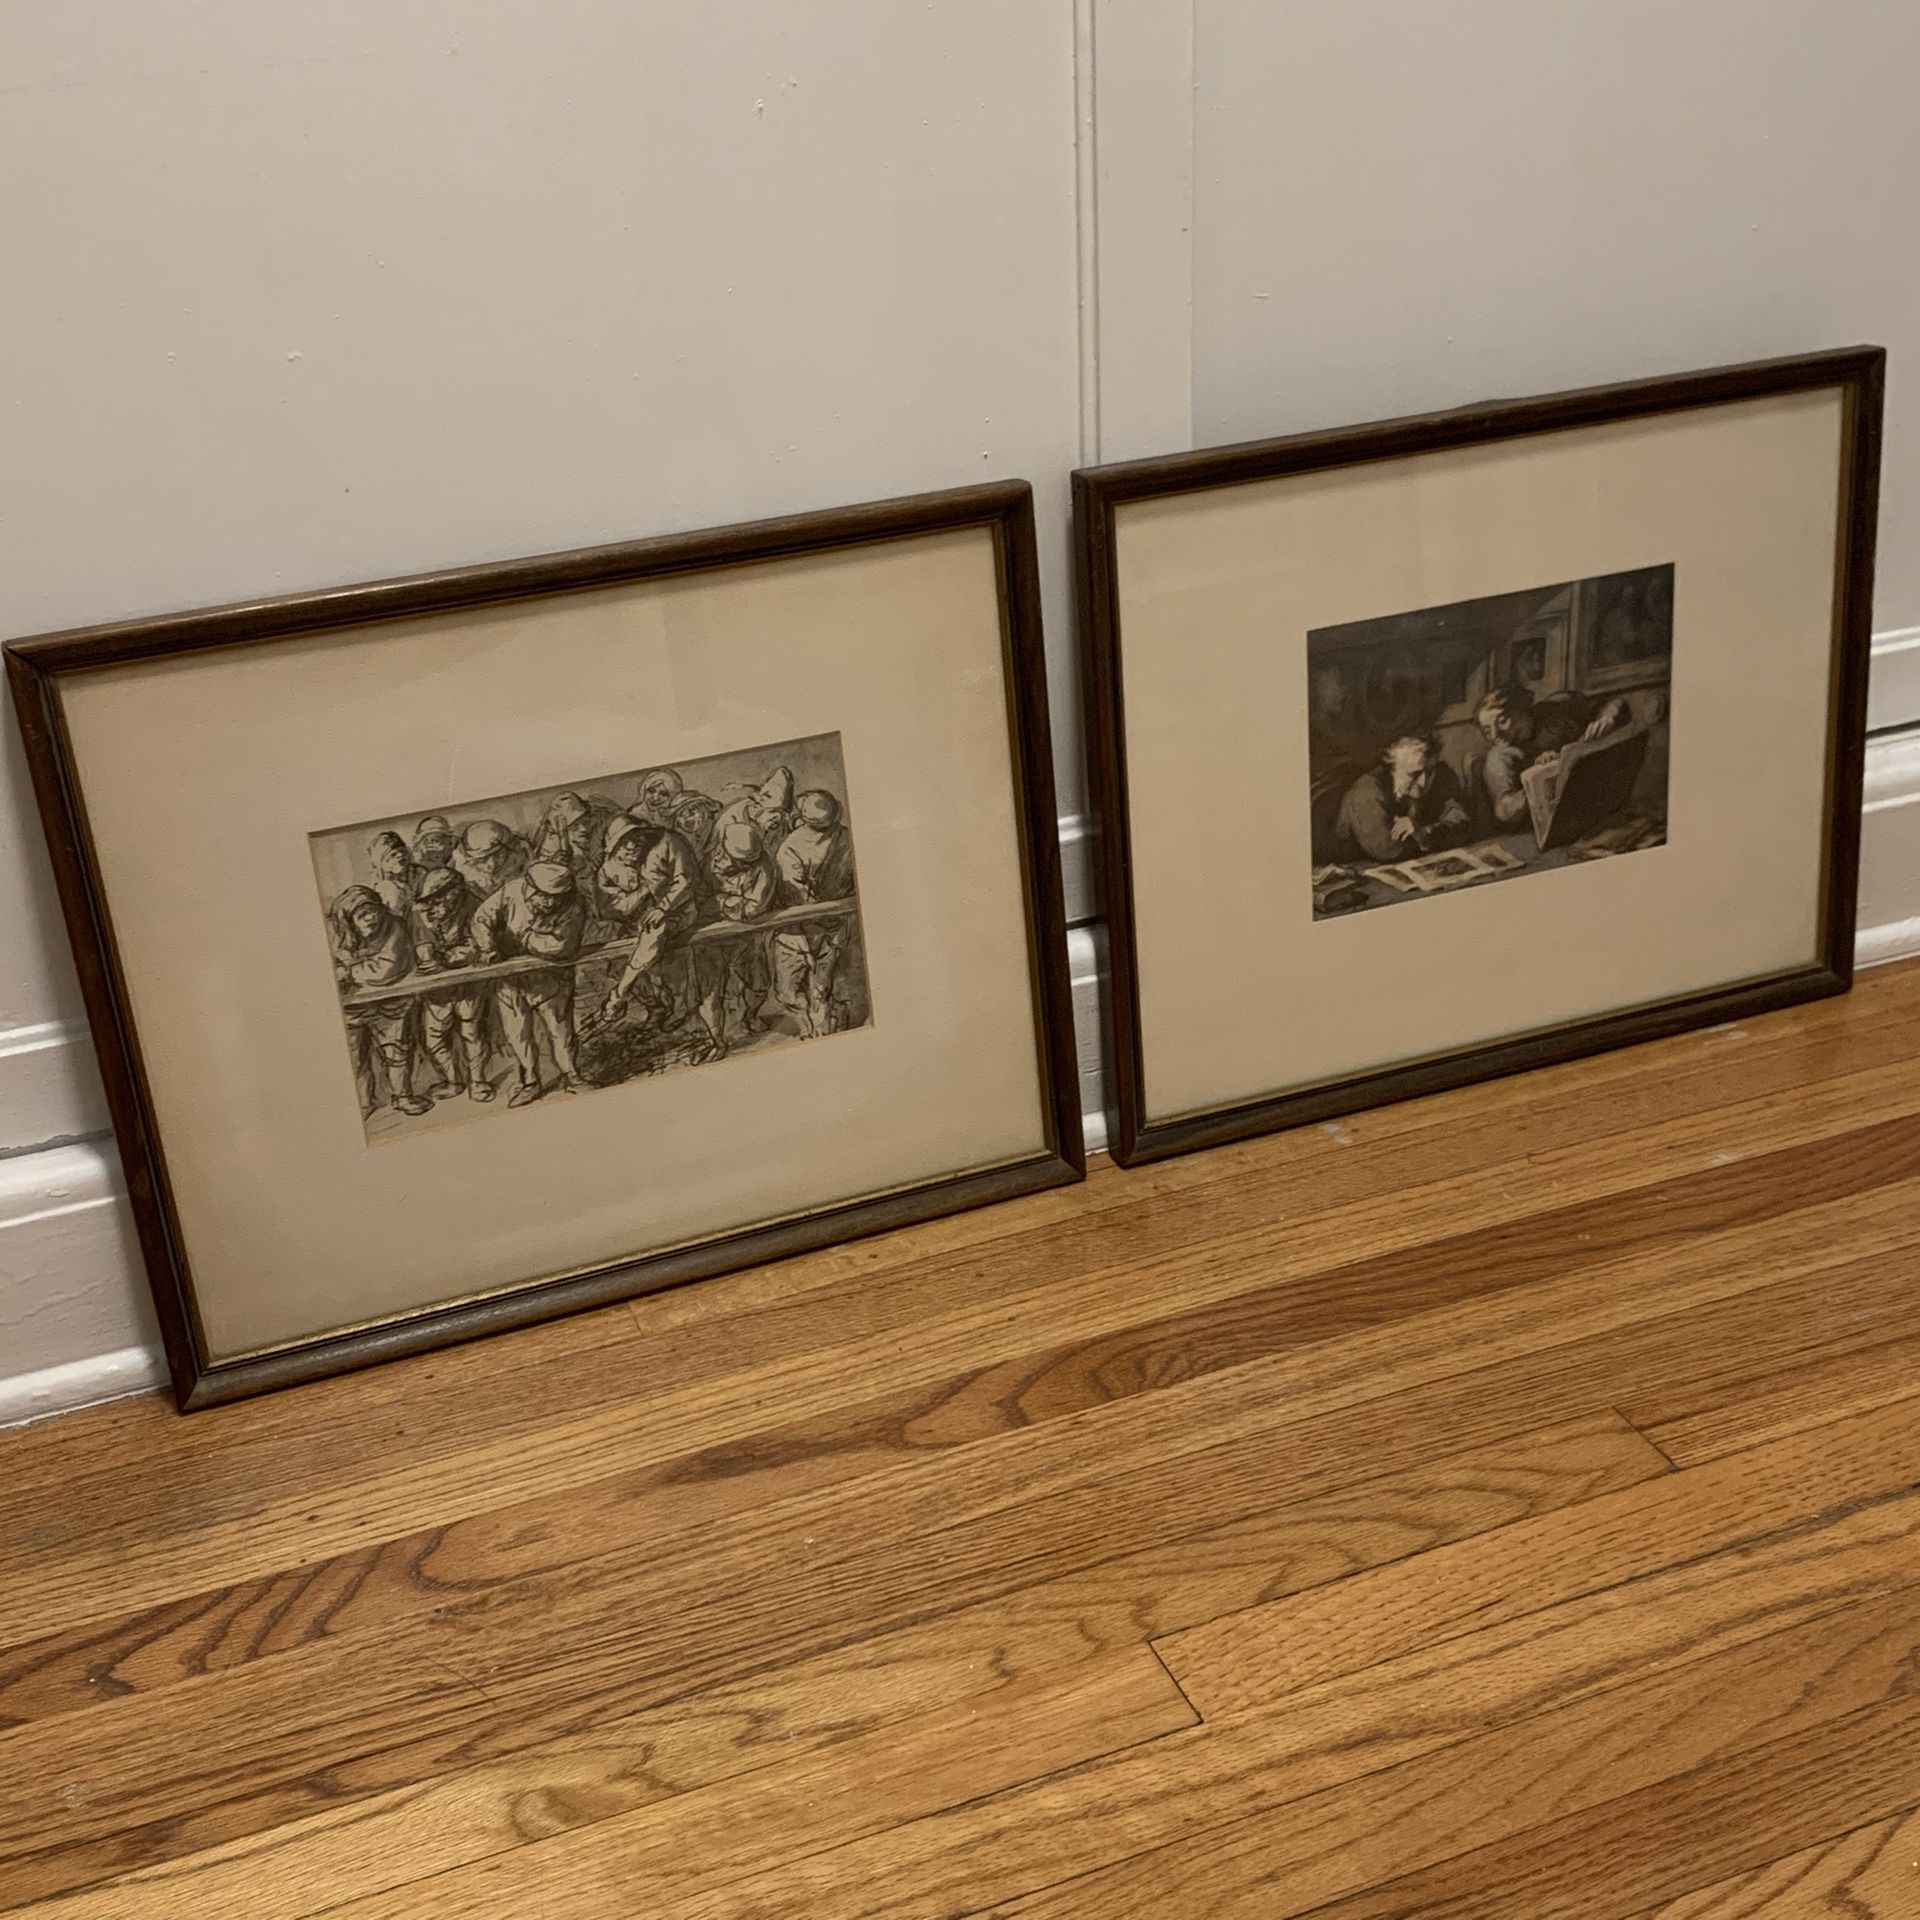 Pair of Antique Fine Art Prints - framed and matted 20.5W x 15H